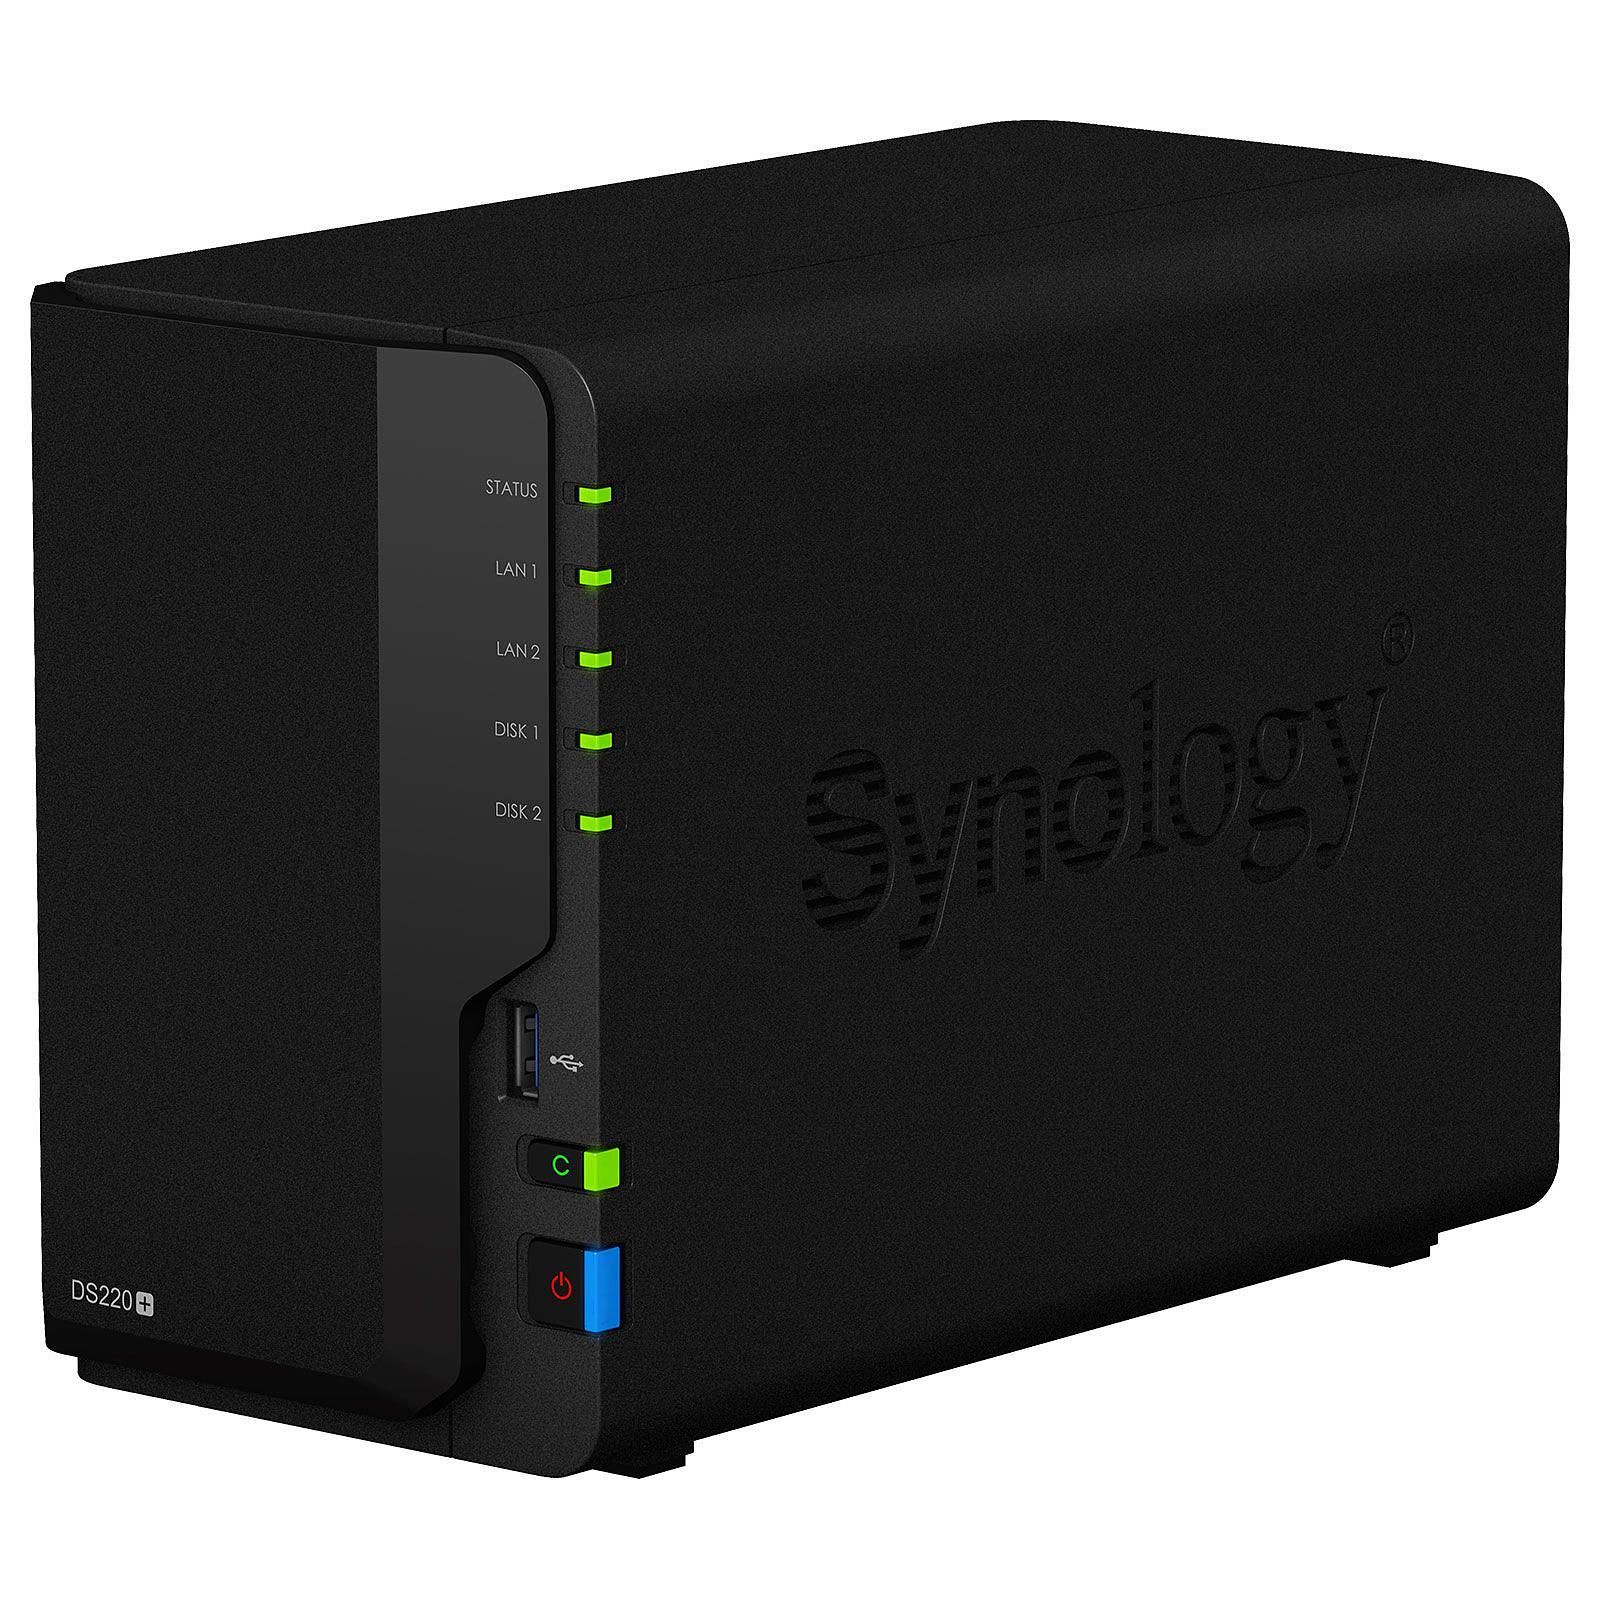 Synology DS220+ - 2 HDD - Serveur NAS Synology - grosbill-pro.com - 4